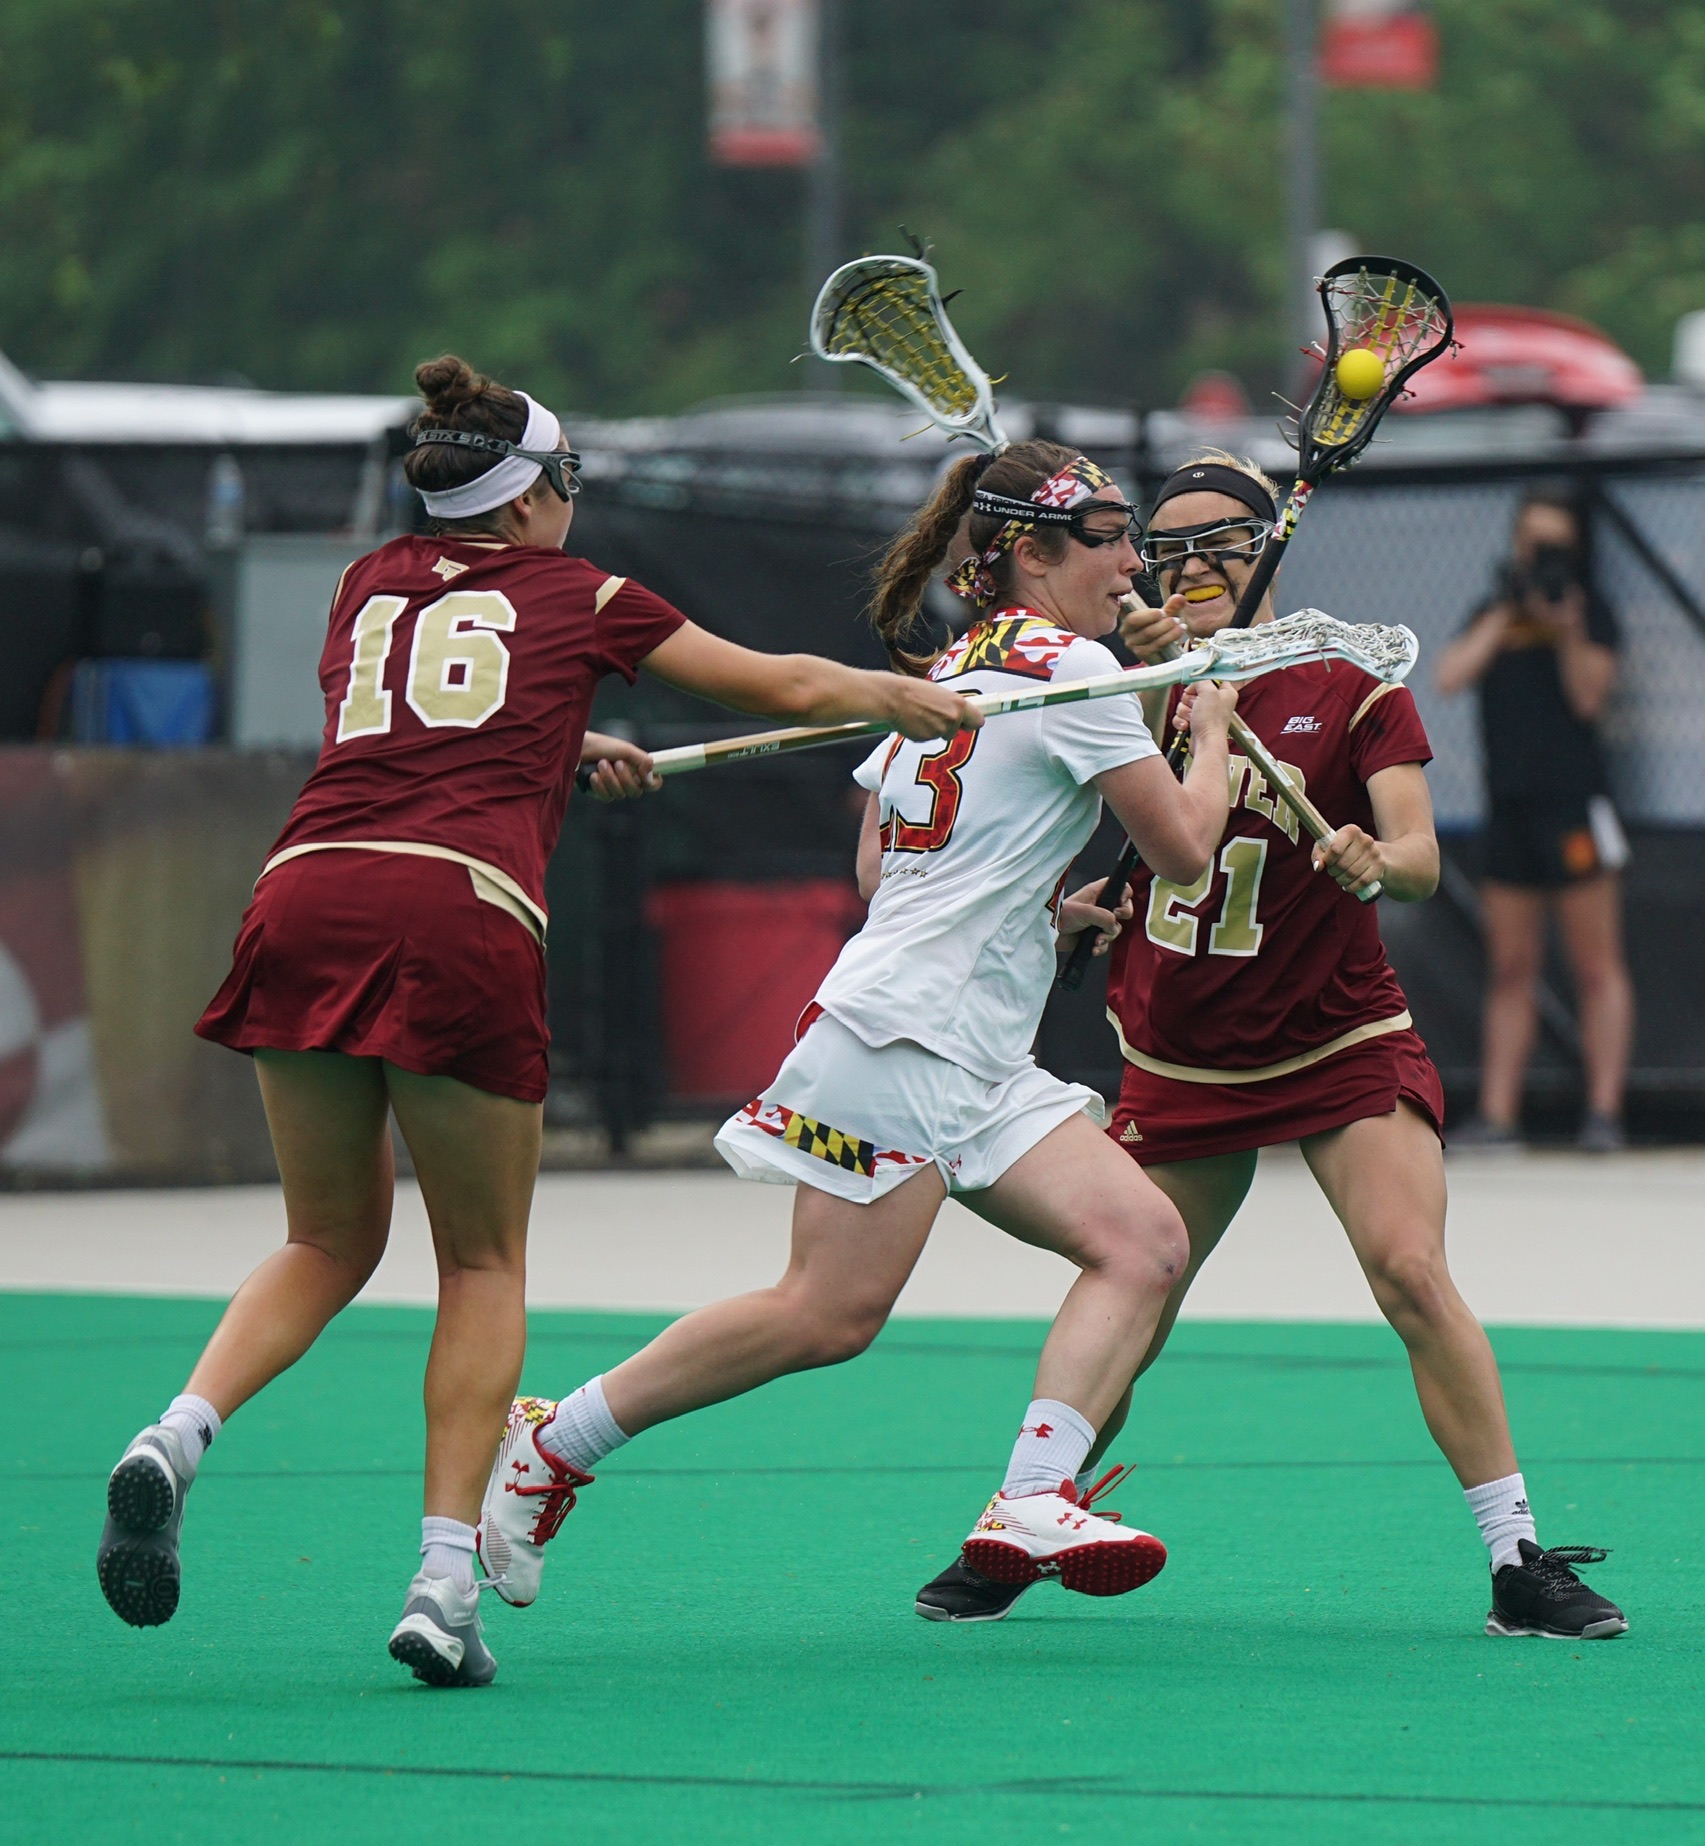 Three young women playing an intense game of lacrosse.